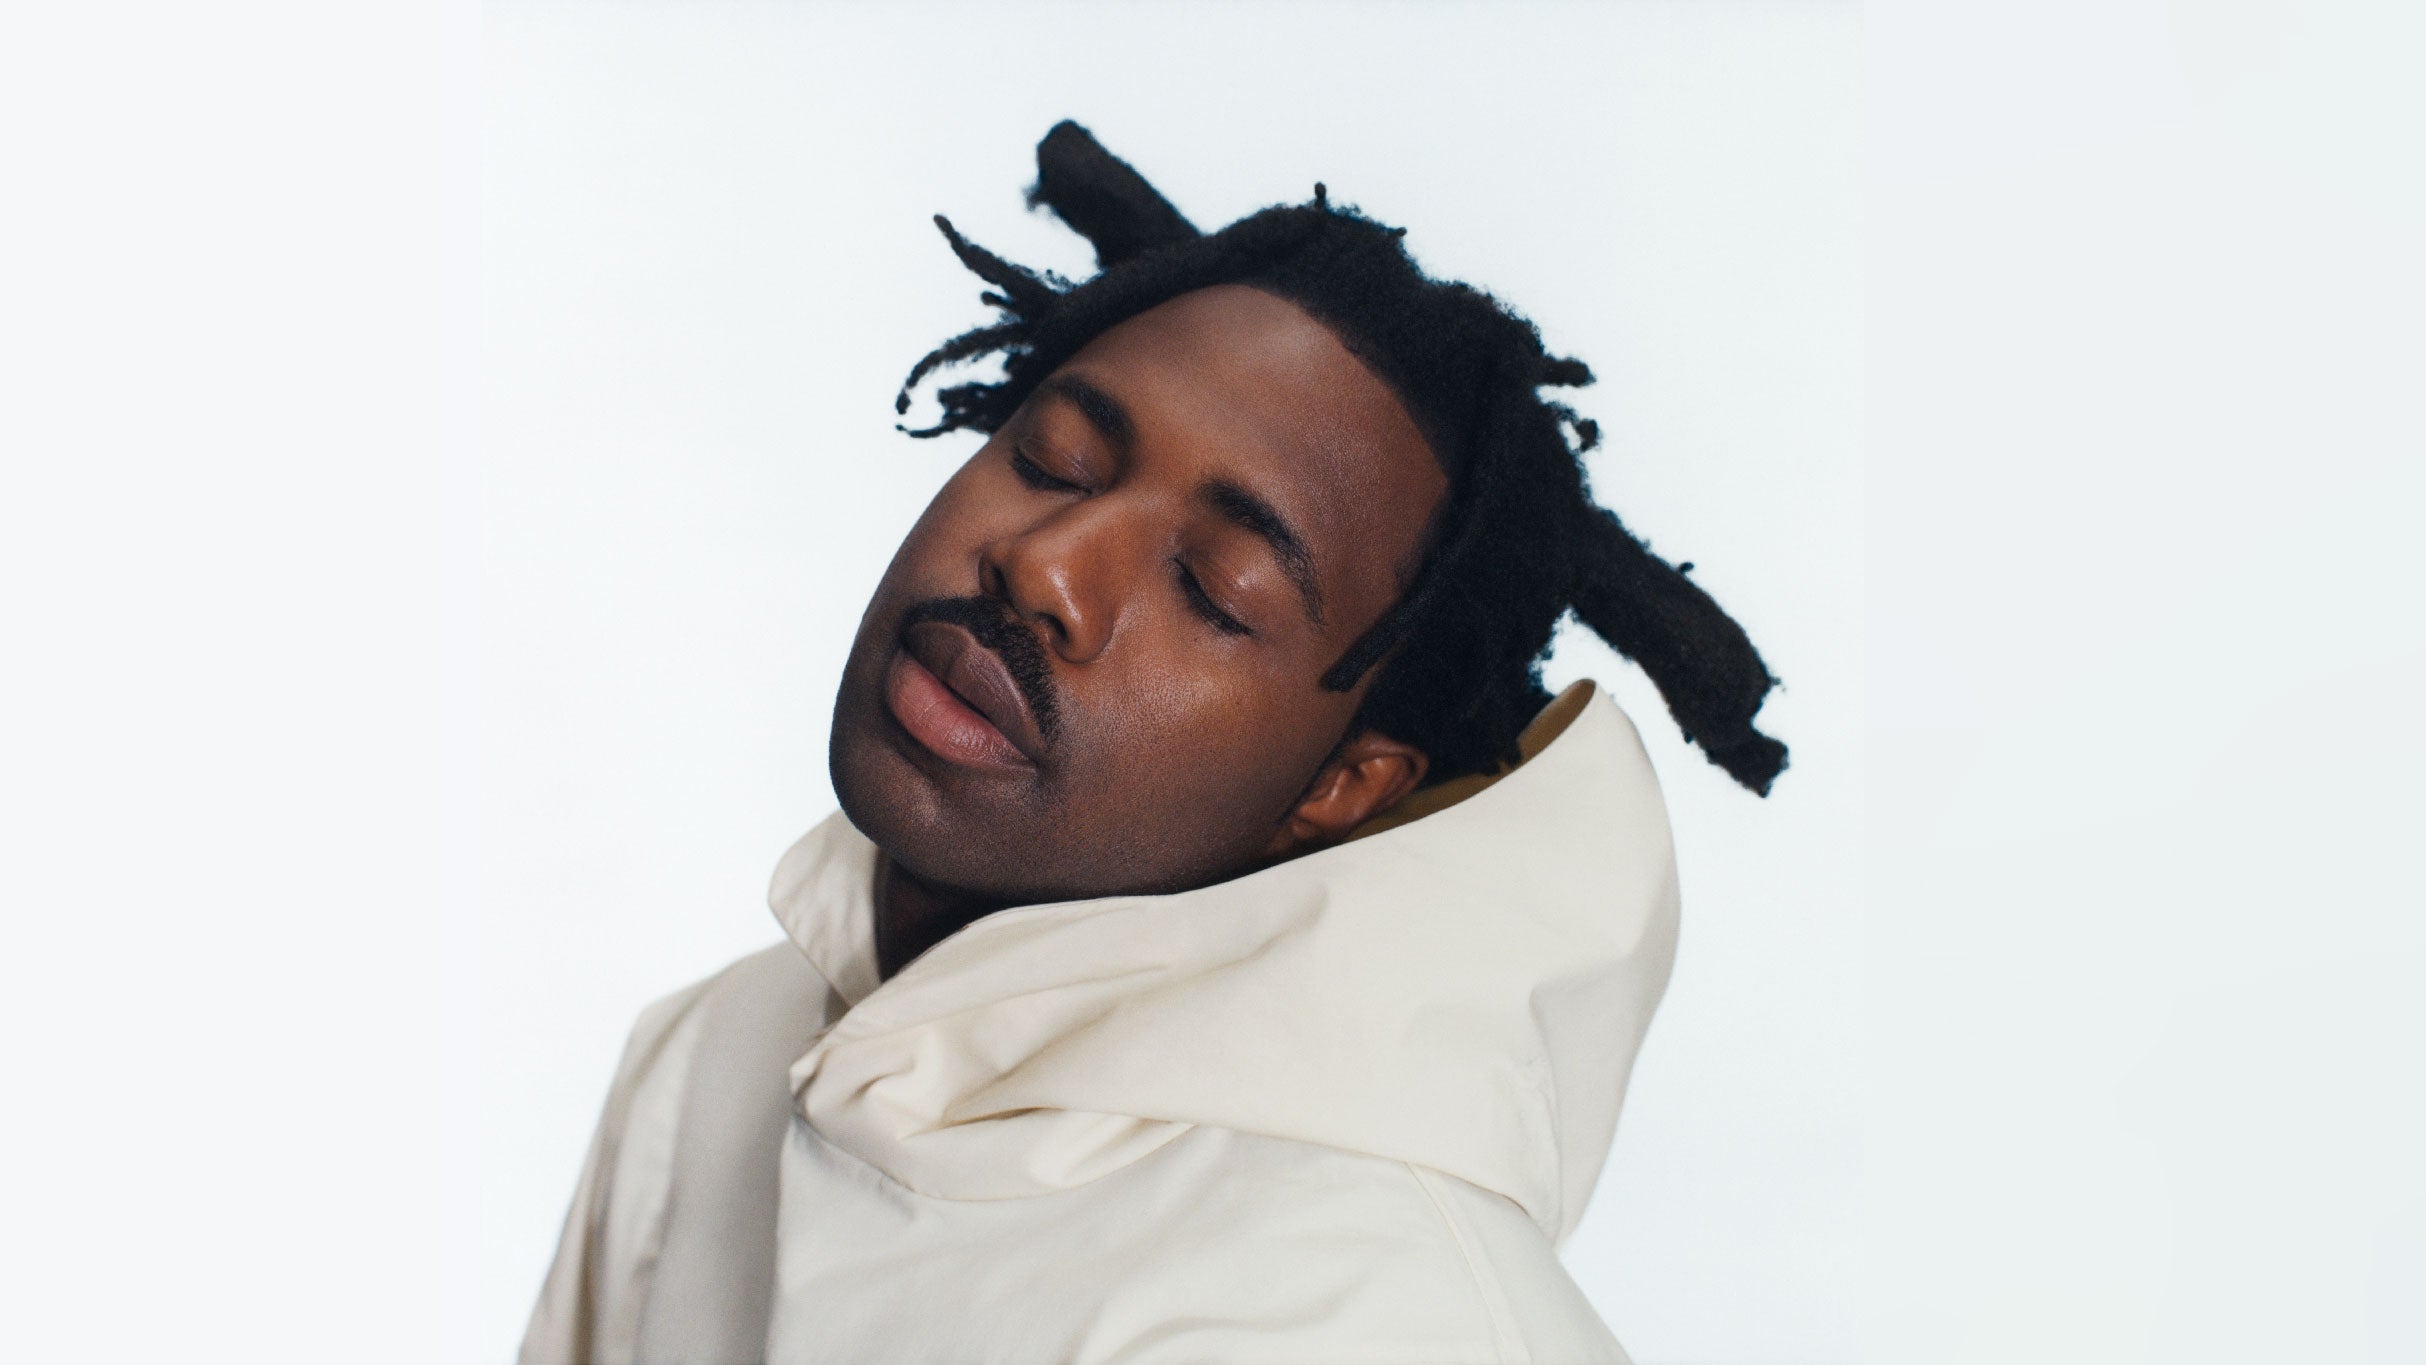 Image used with permission from Ticketmaster | Sampha tickets